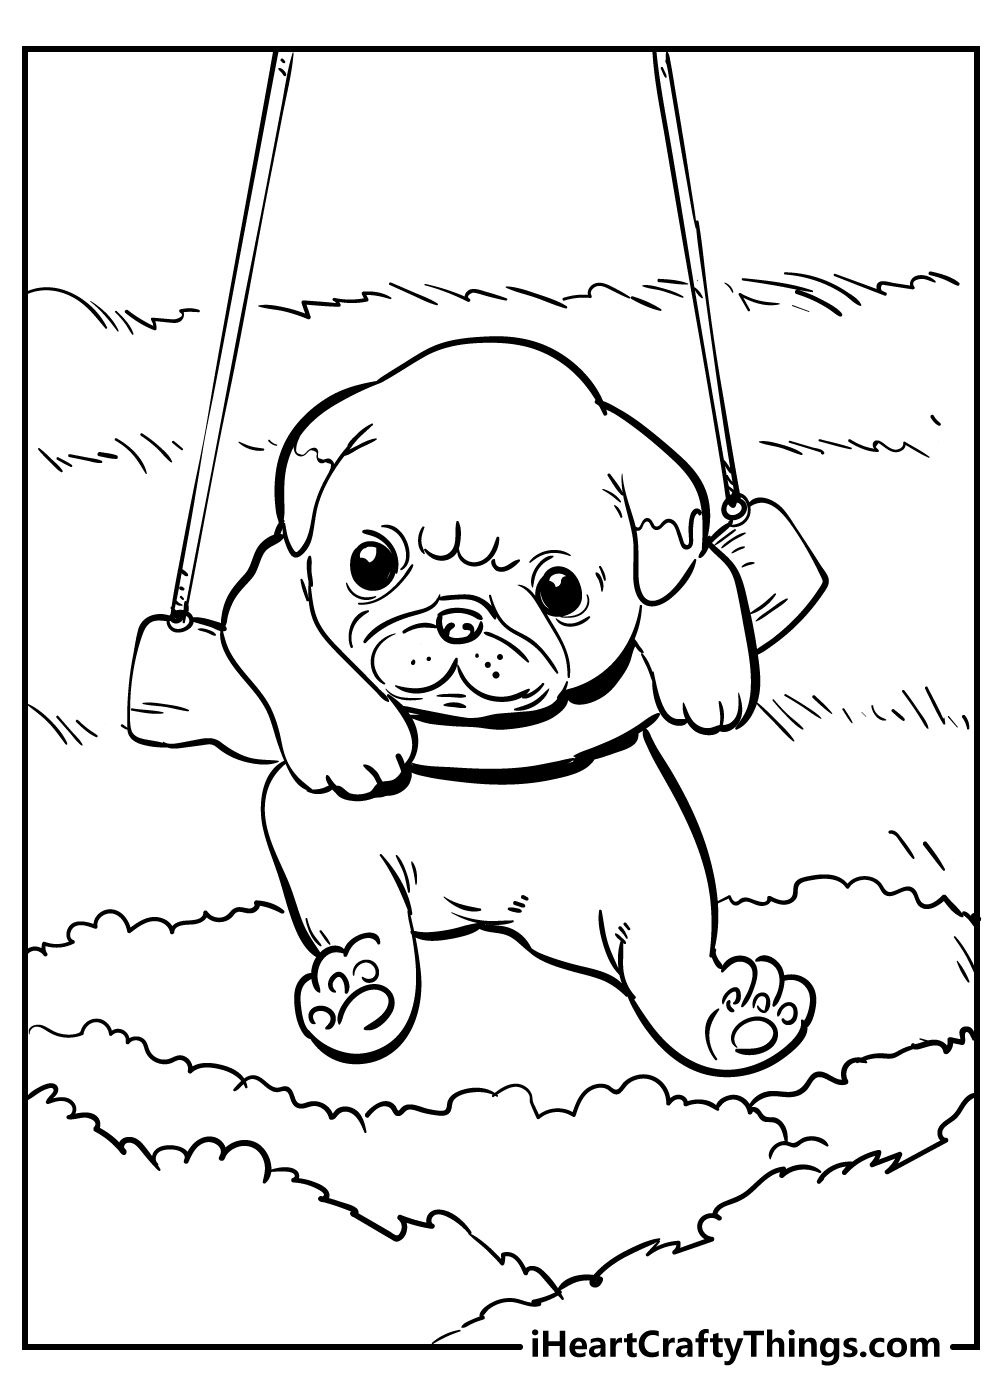 Cute animals coloring pages puppy coloring pages cool coloring pages animal coloring pages